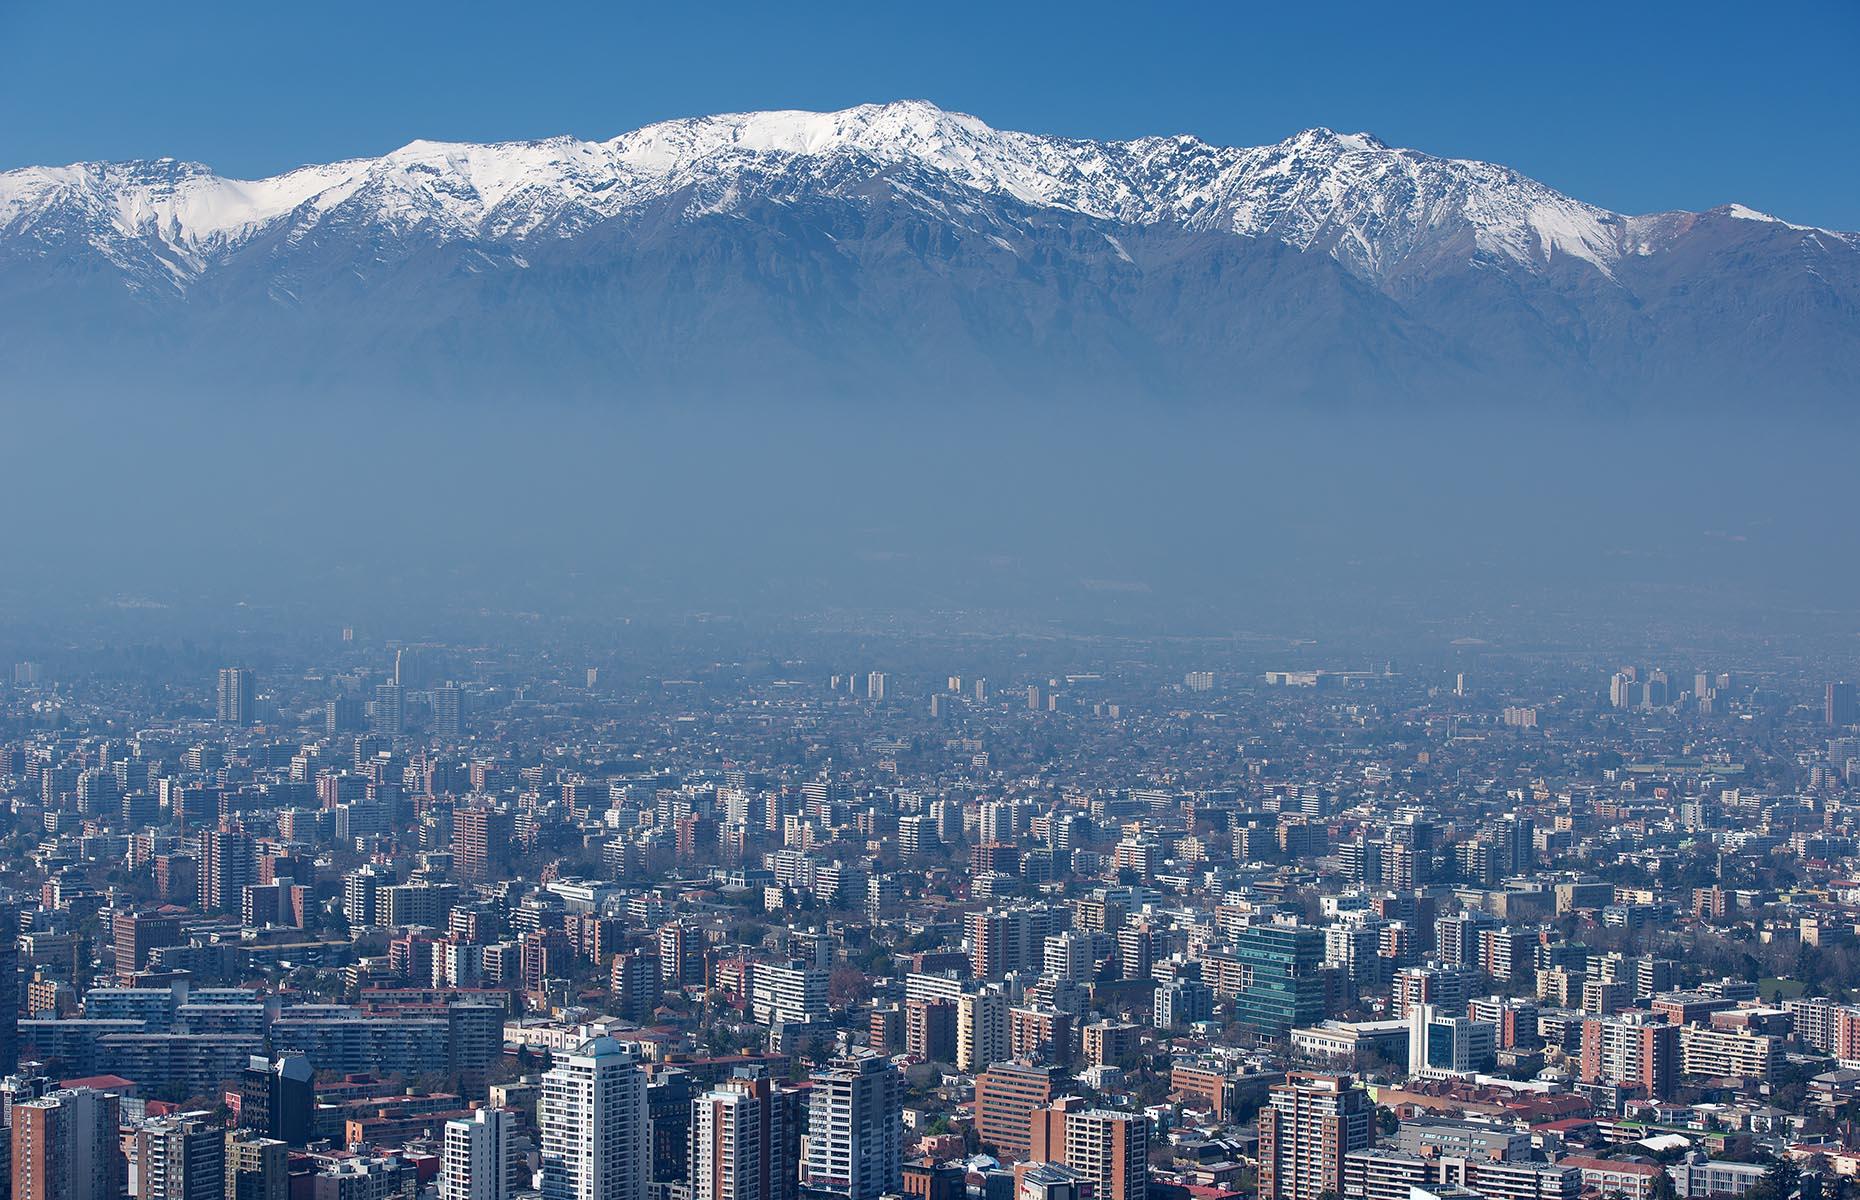 With the snow-capped Andes looming over the city, this capital is one of the largest in the whole continent. It's named after the biblical figure St James.